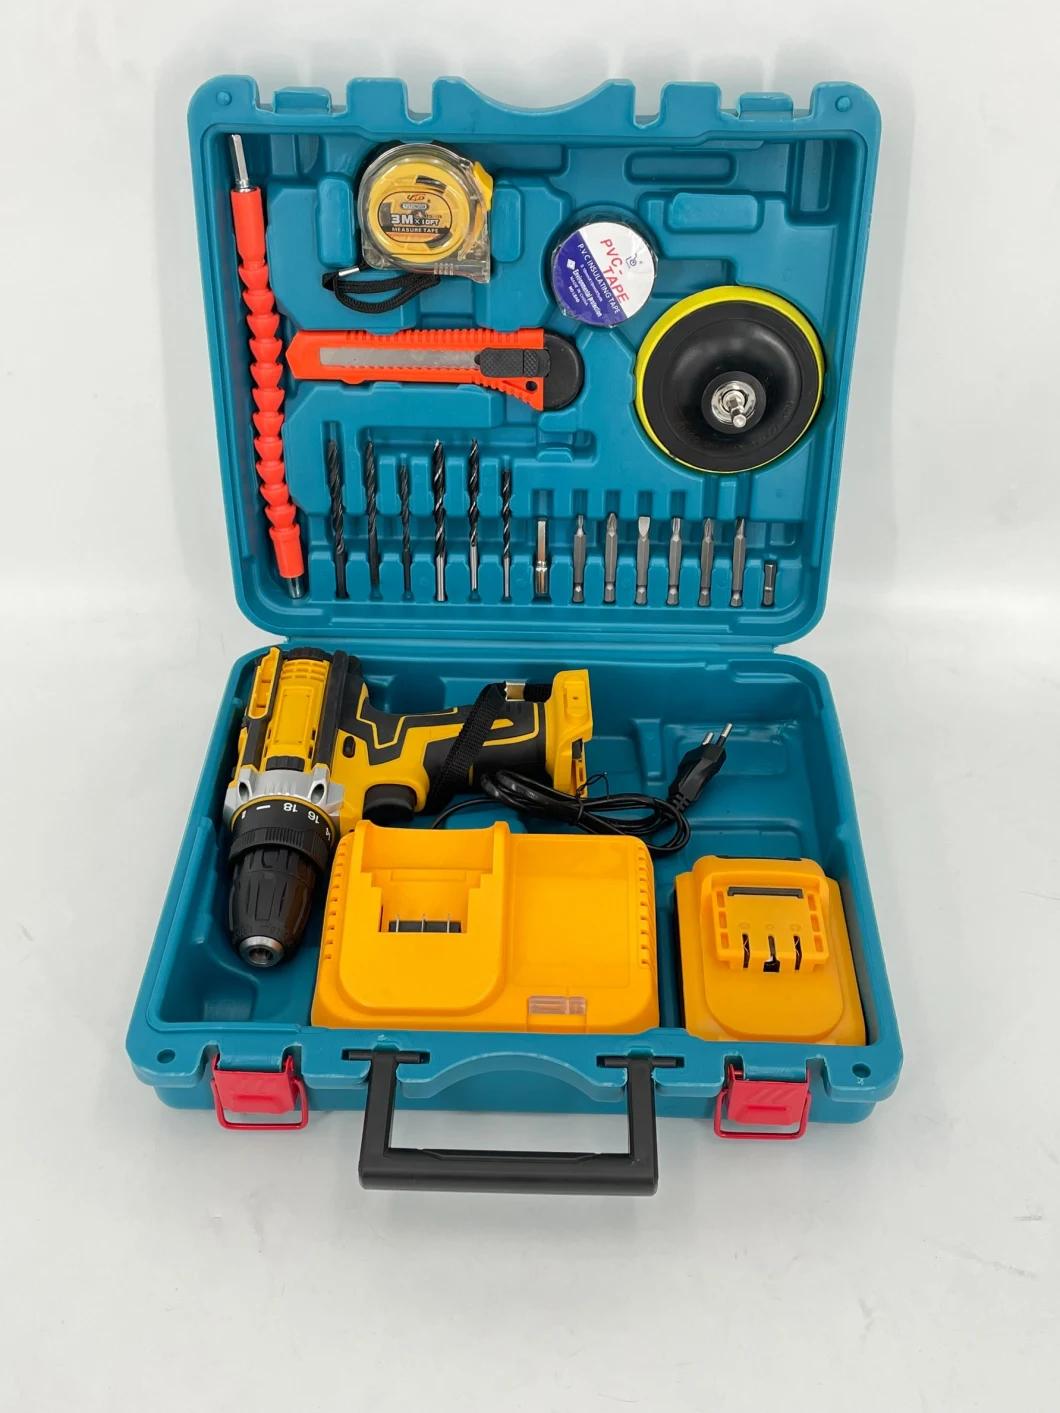 20V Power Tools Set with Cordless Drill with Accessories